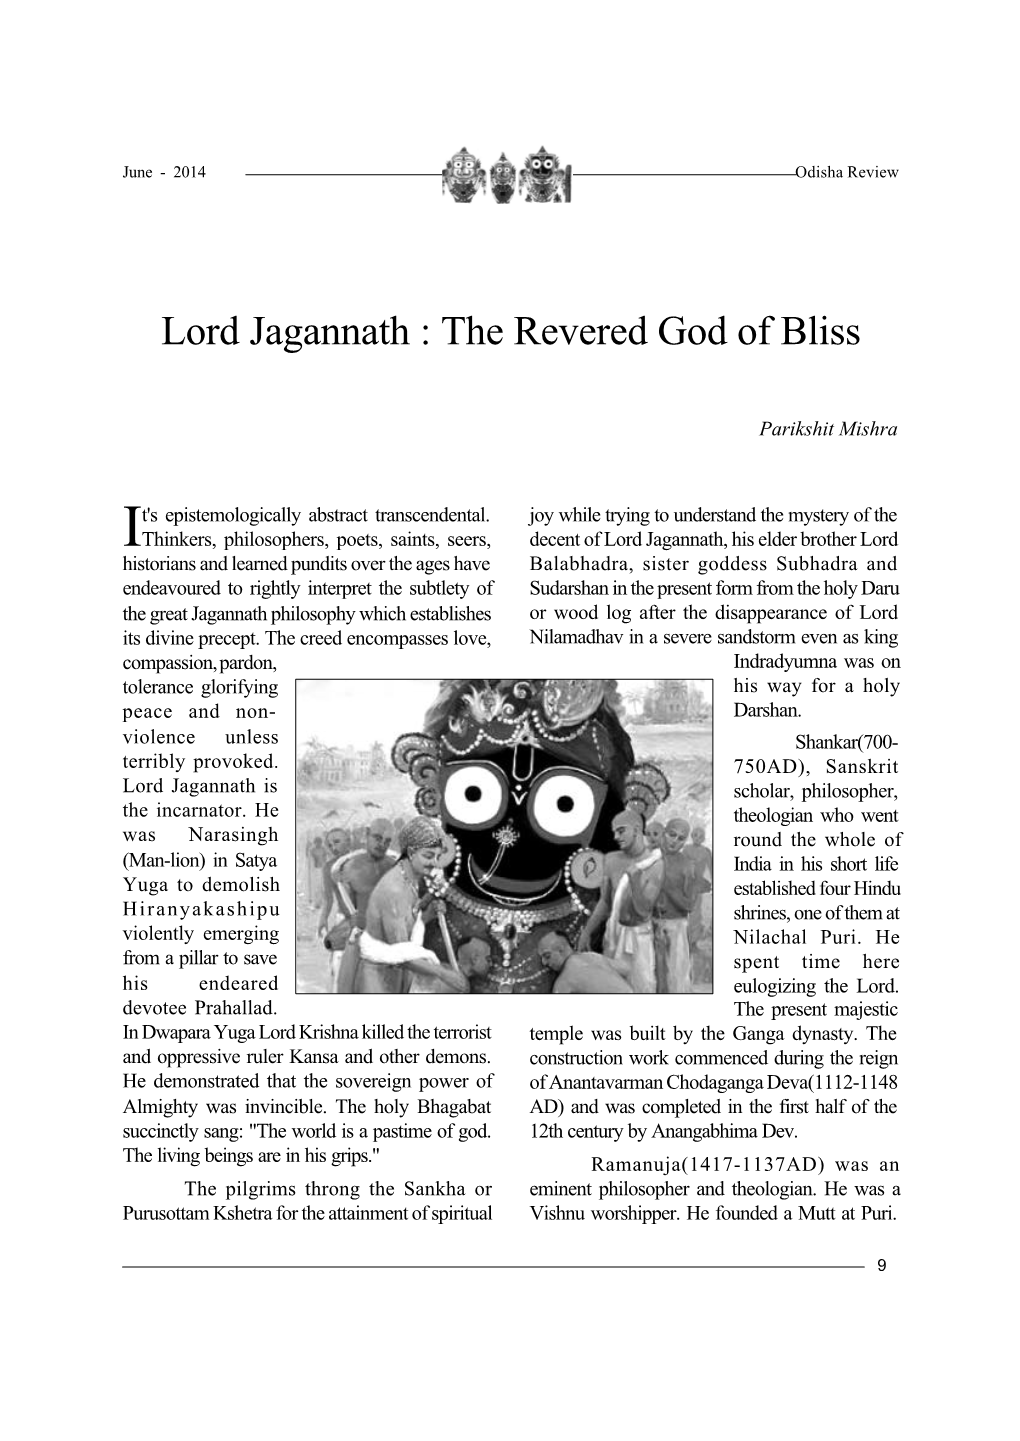 Lord Jagannath : the Revered God of Bliss